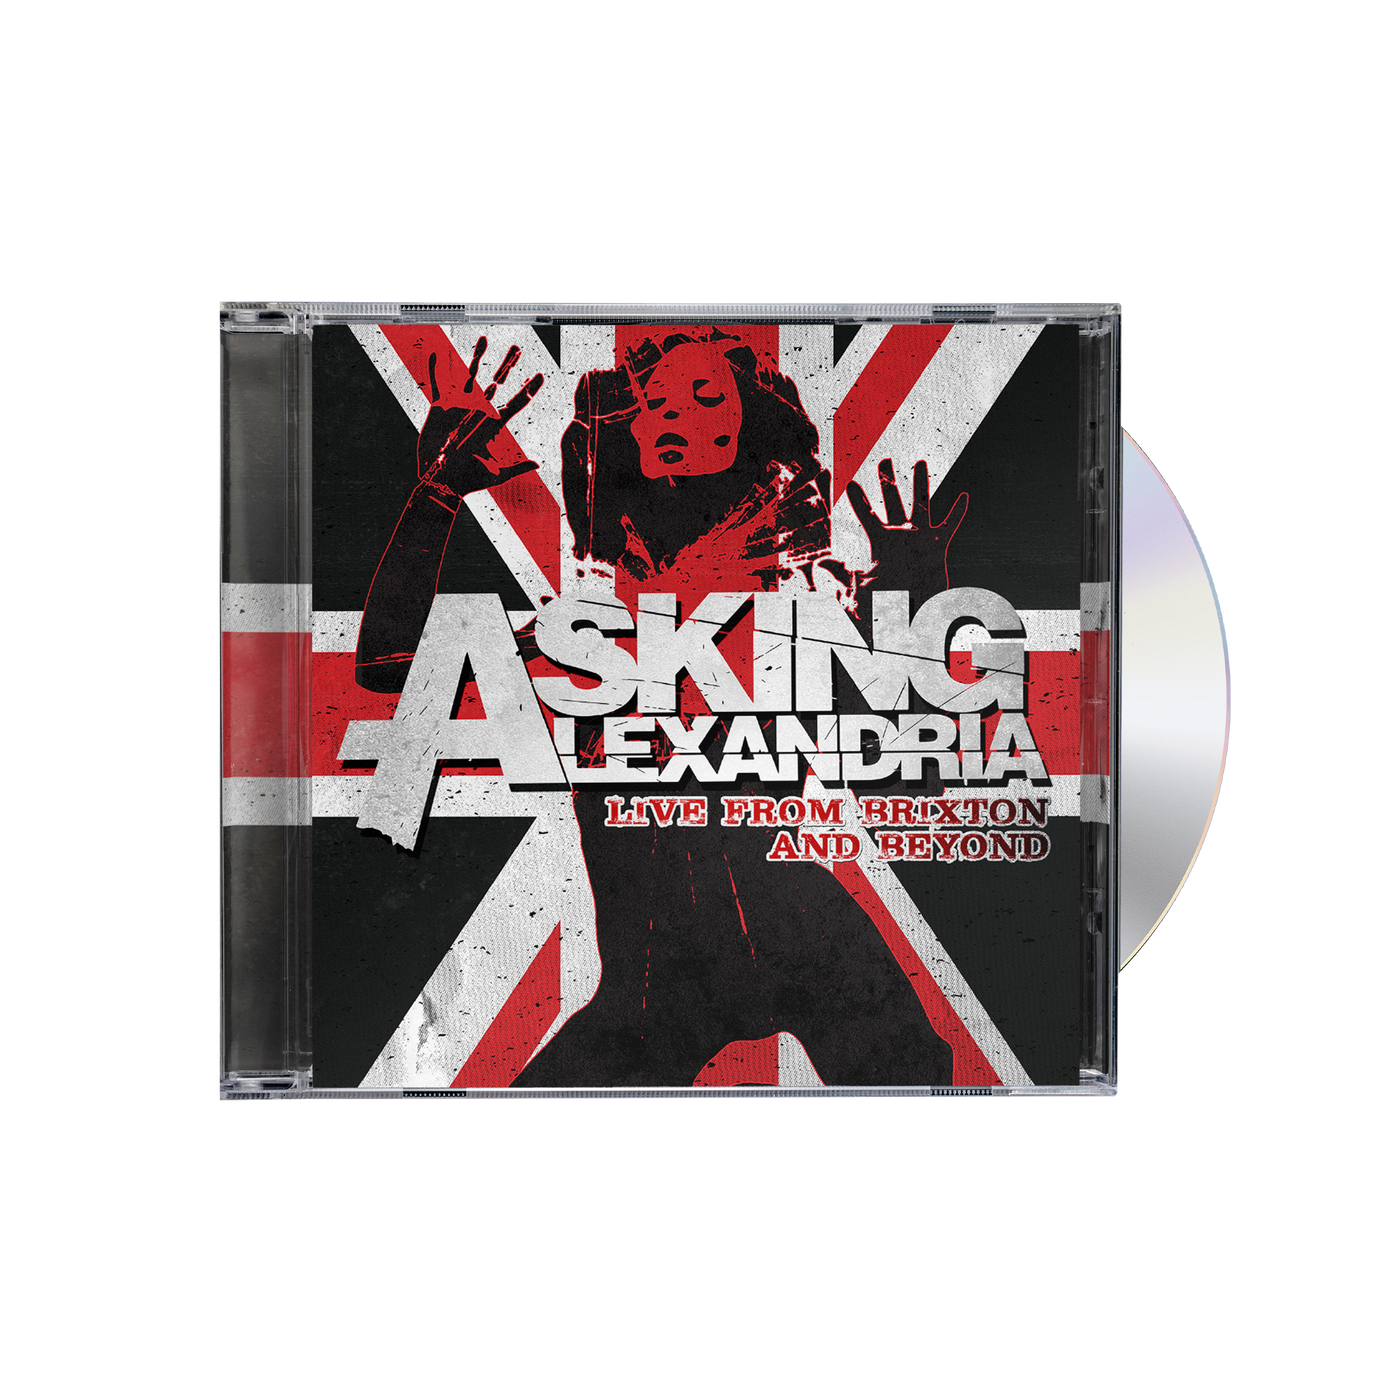 Asking Alexandria - 'Live From Brixton and Beyond' DVD